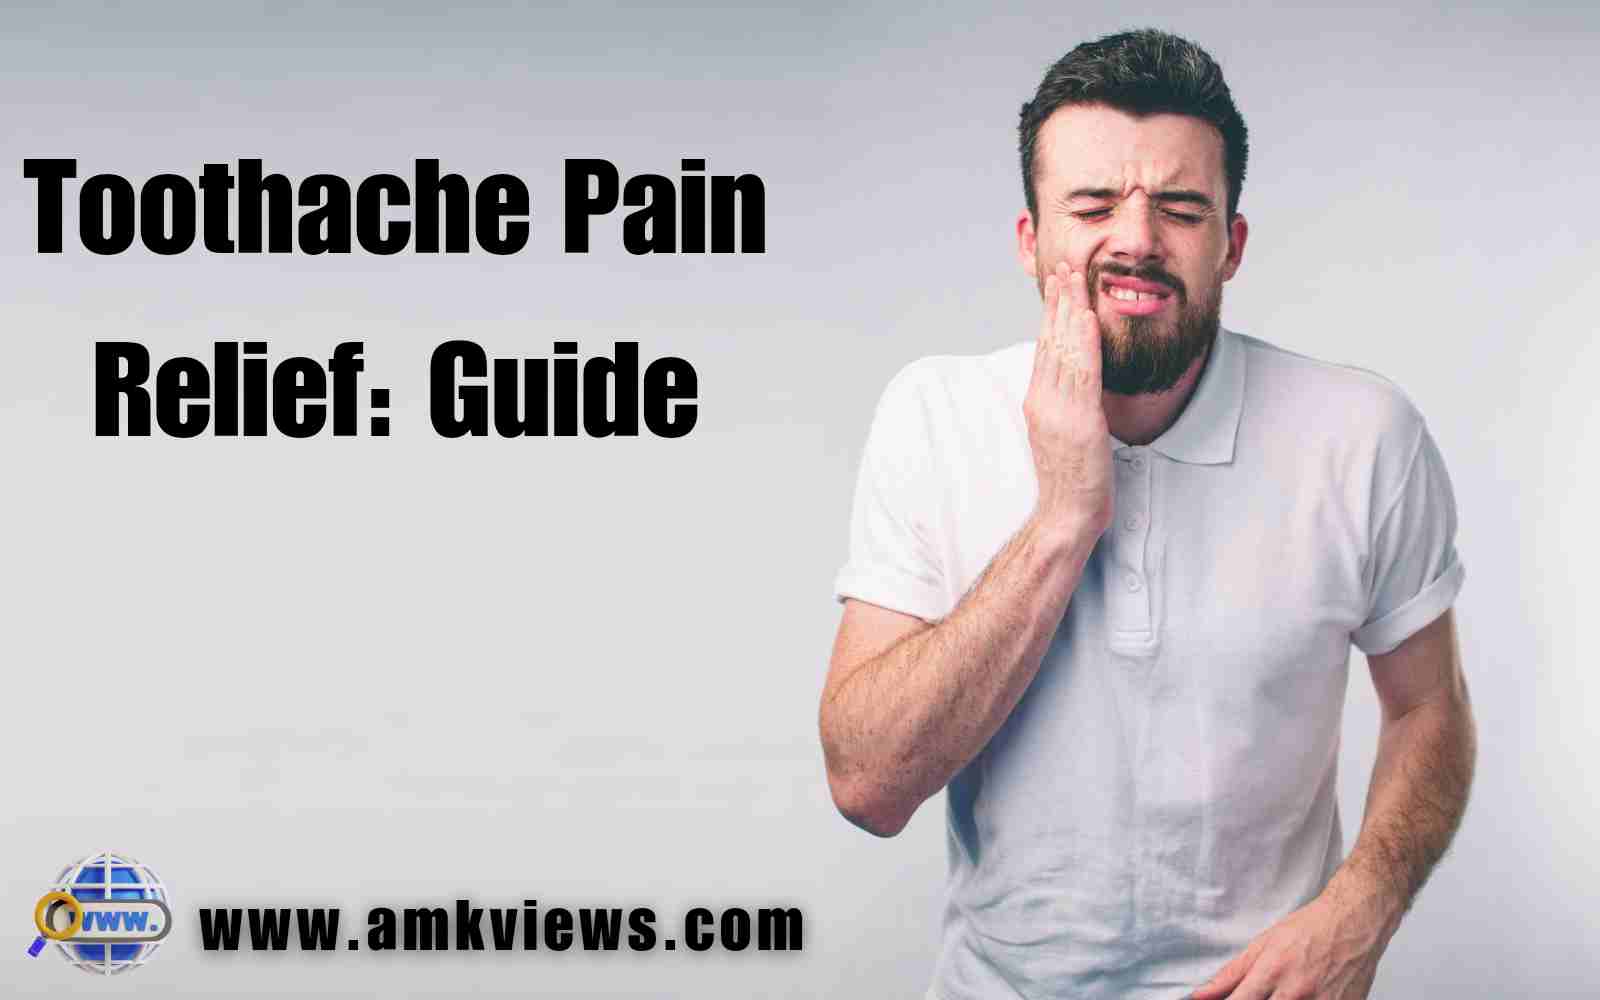 Toothache Pain Relief: Guide